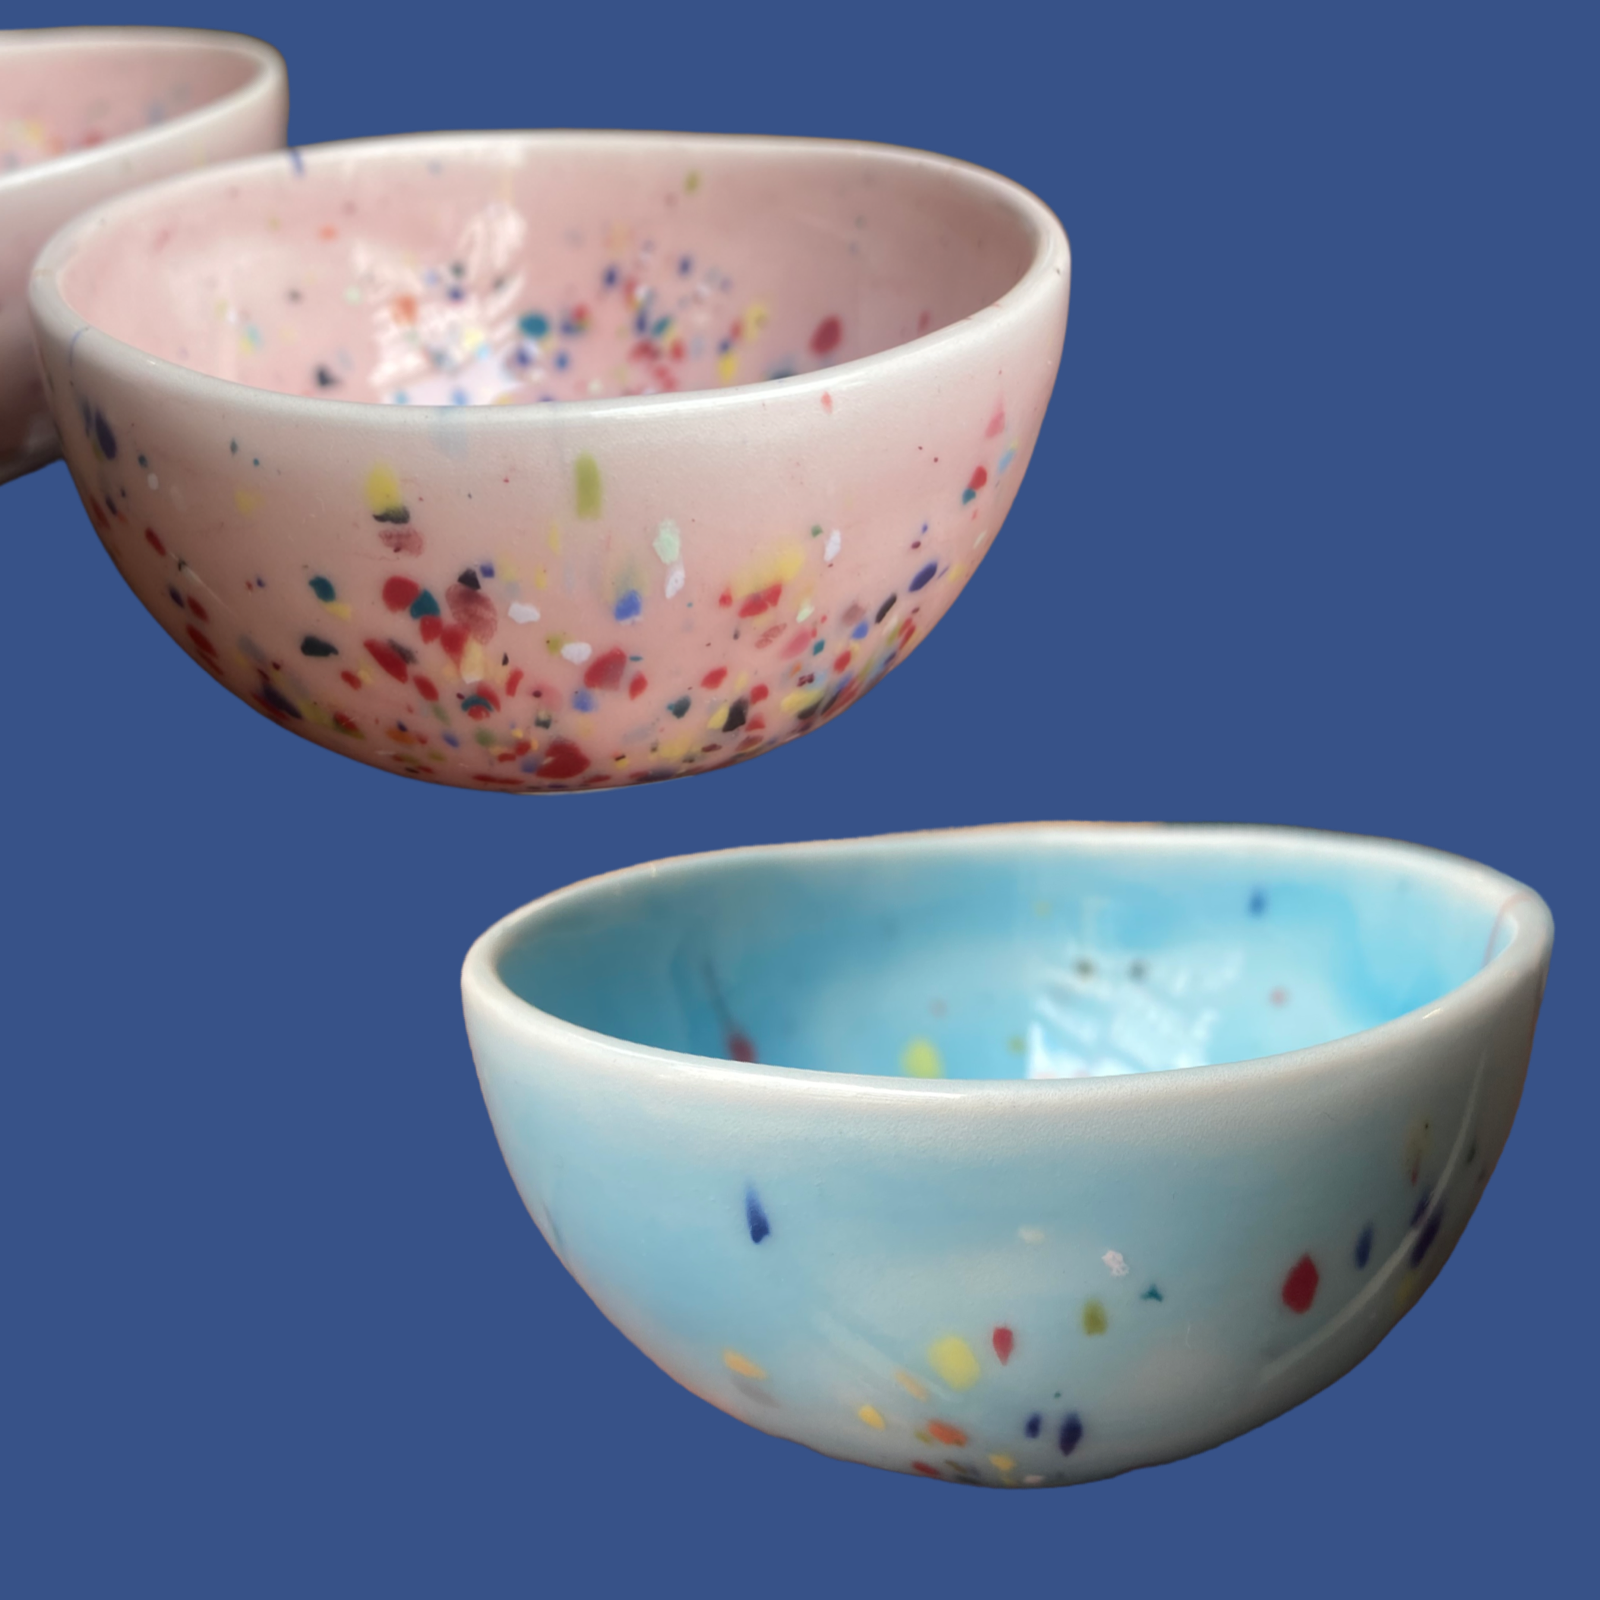 CARNIVAL SMALL BOWL by Suuuper